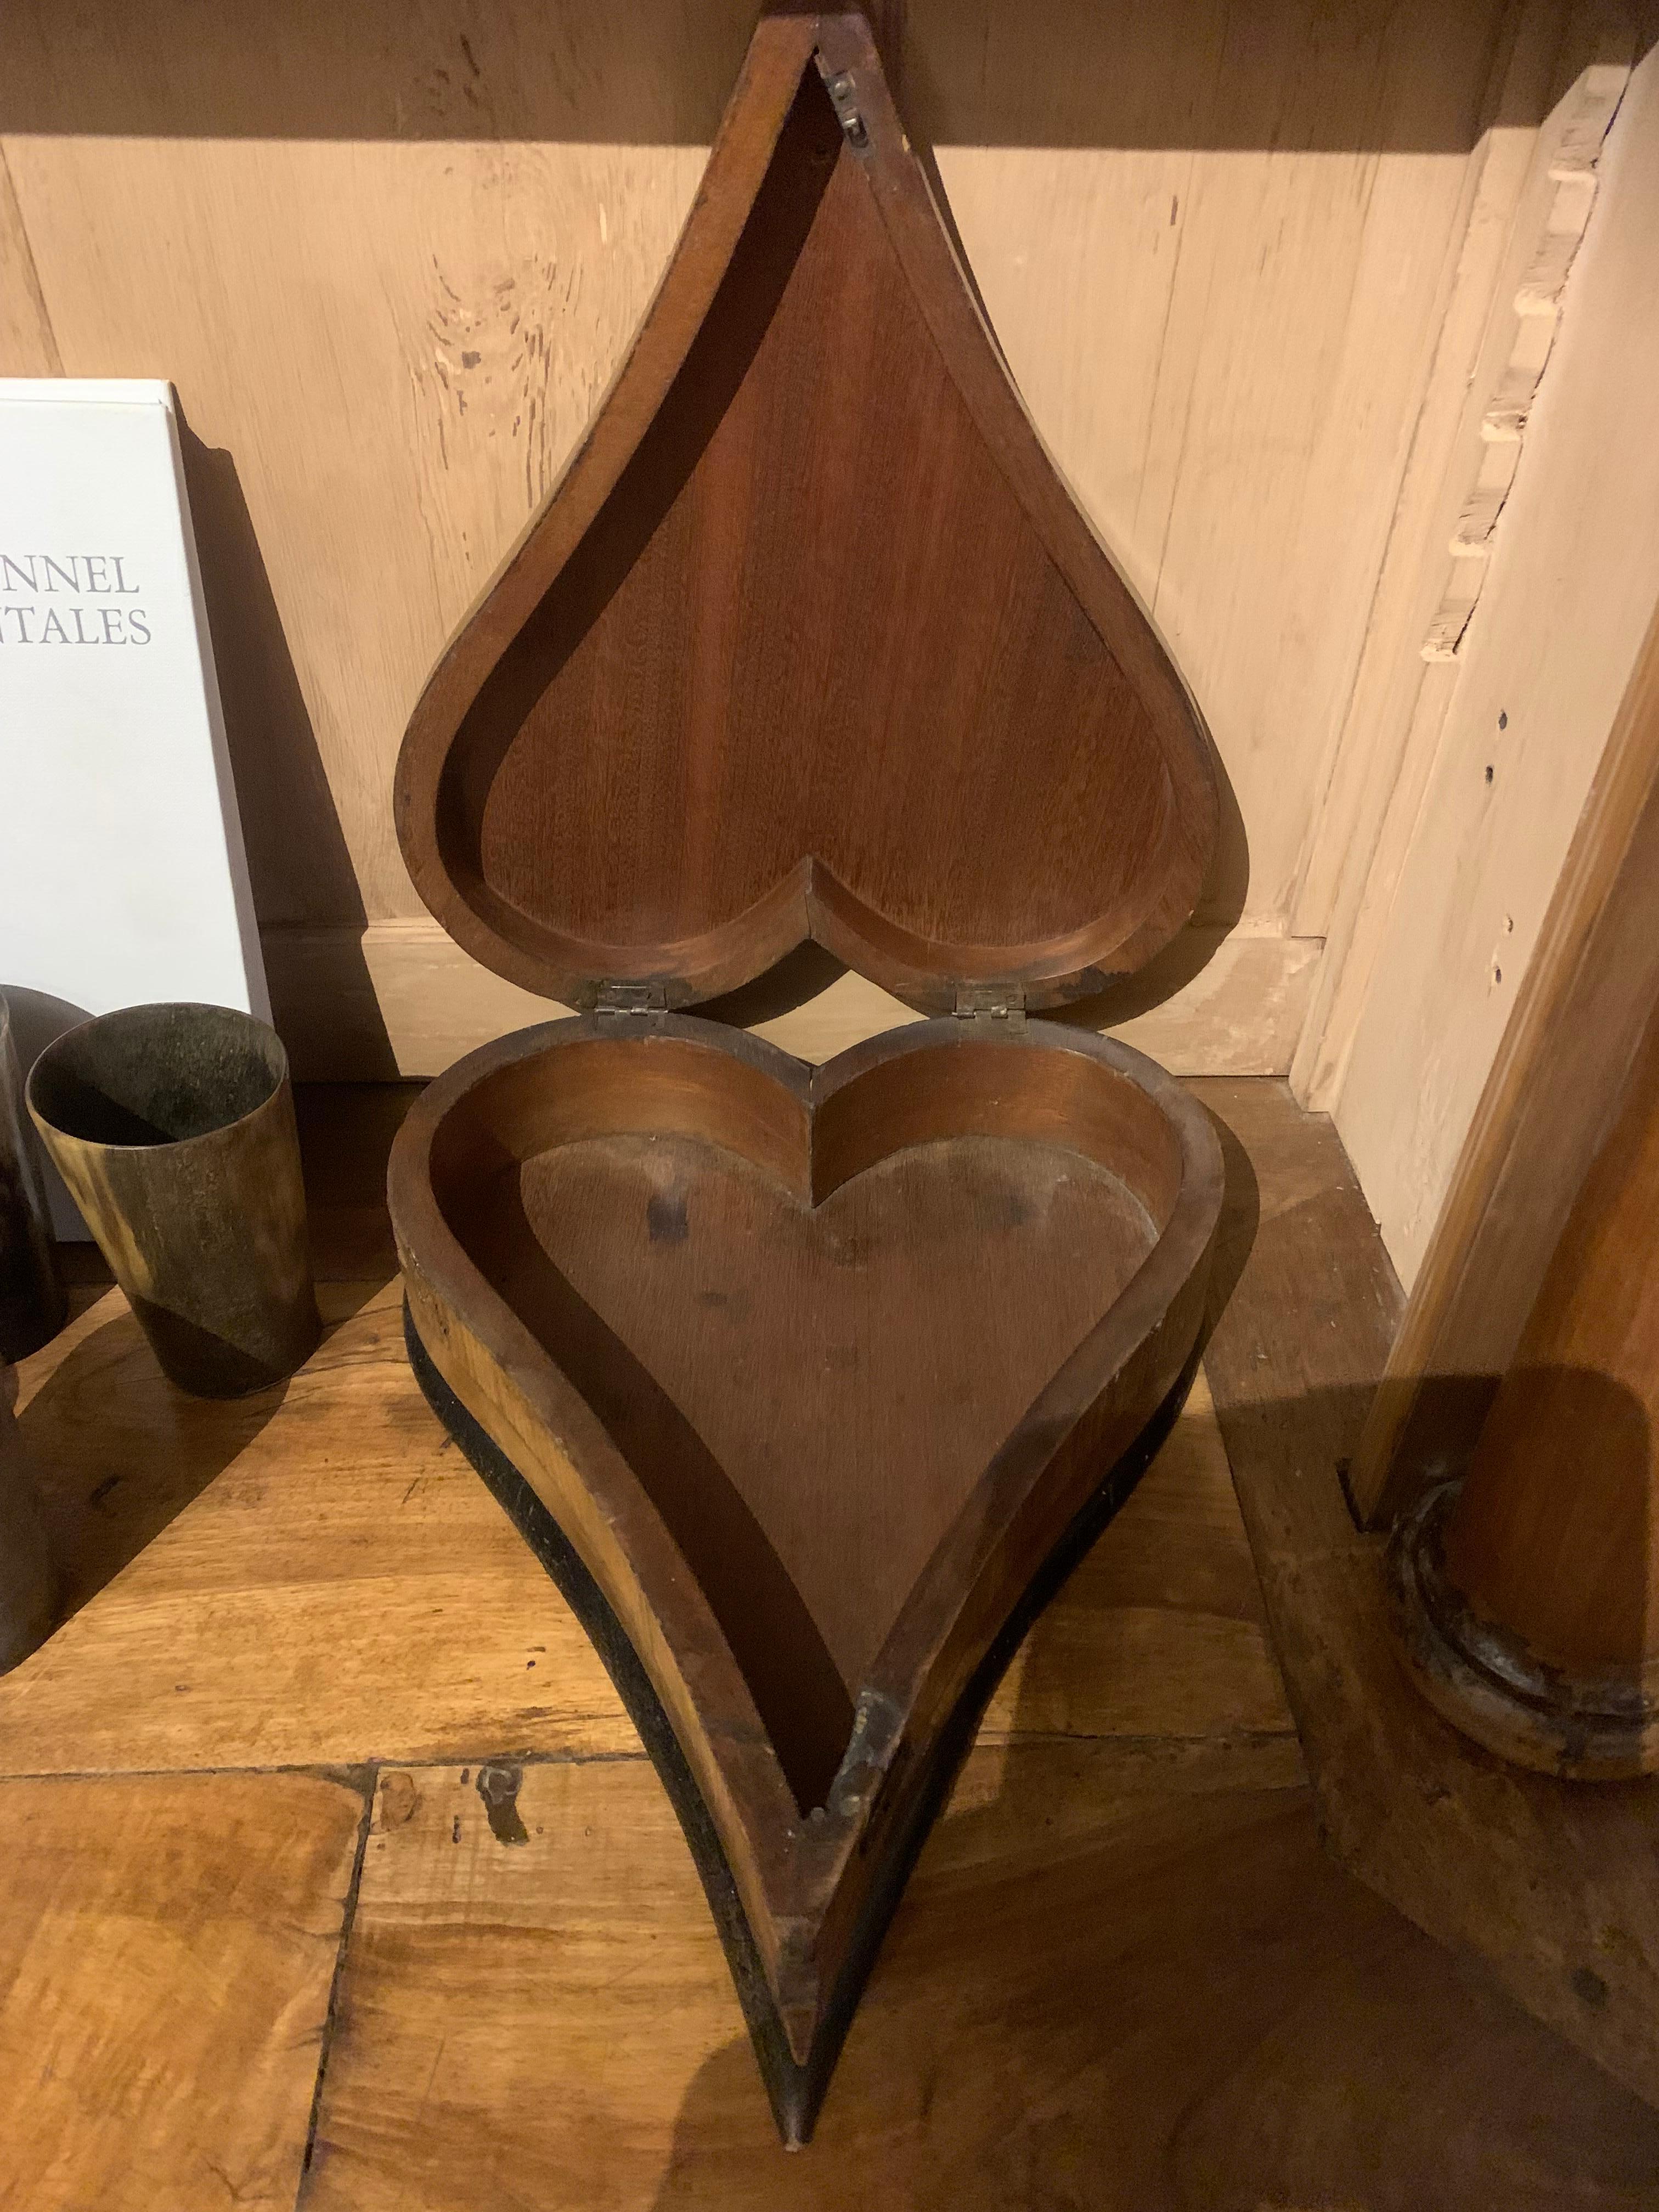 Victorian 19th Century Heartshaped Jewelry Box For Sale